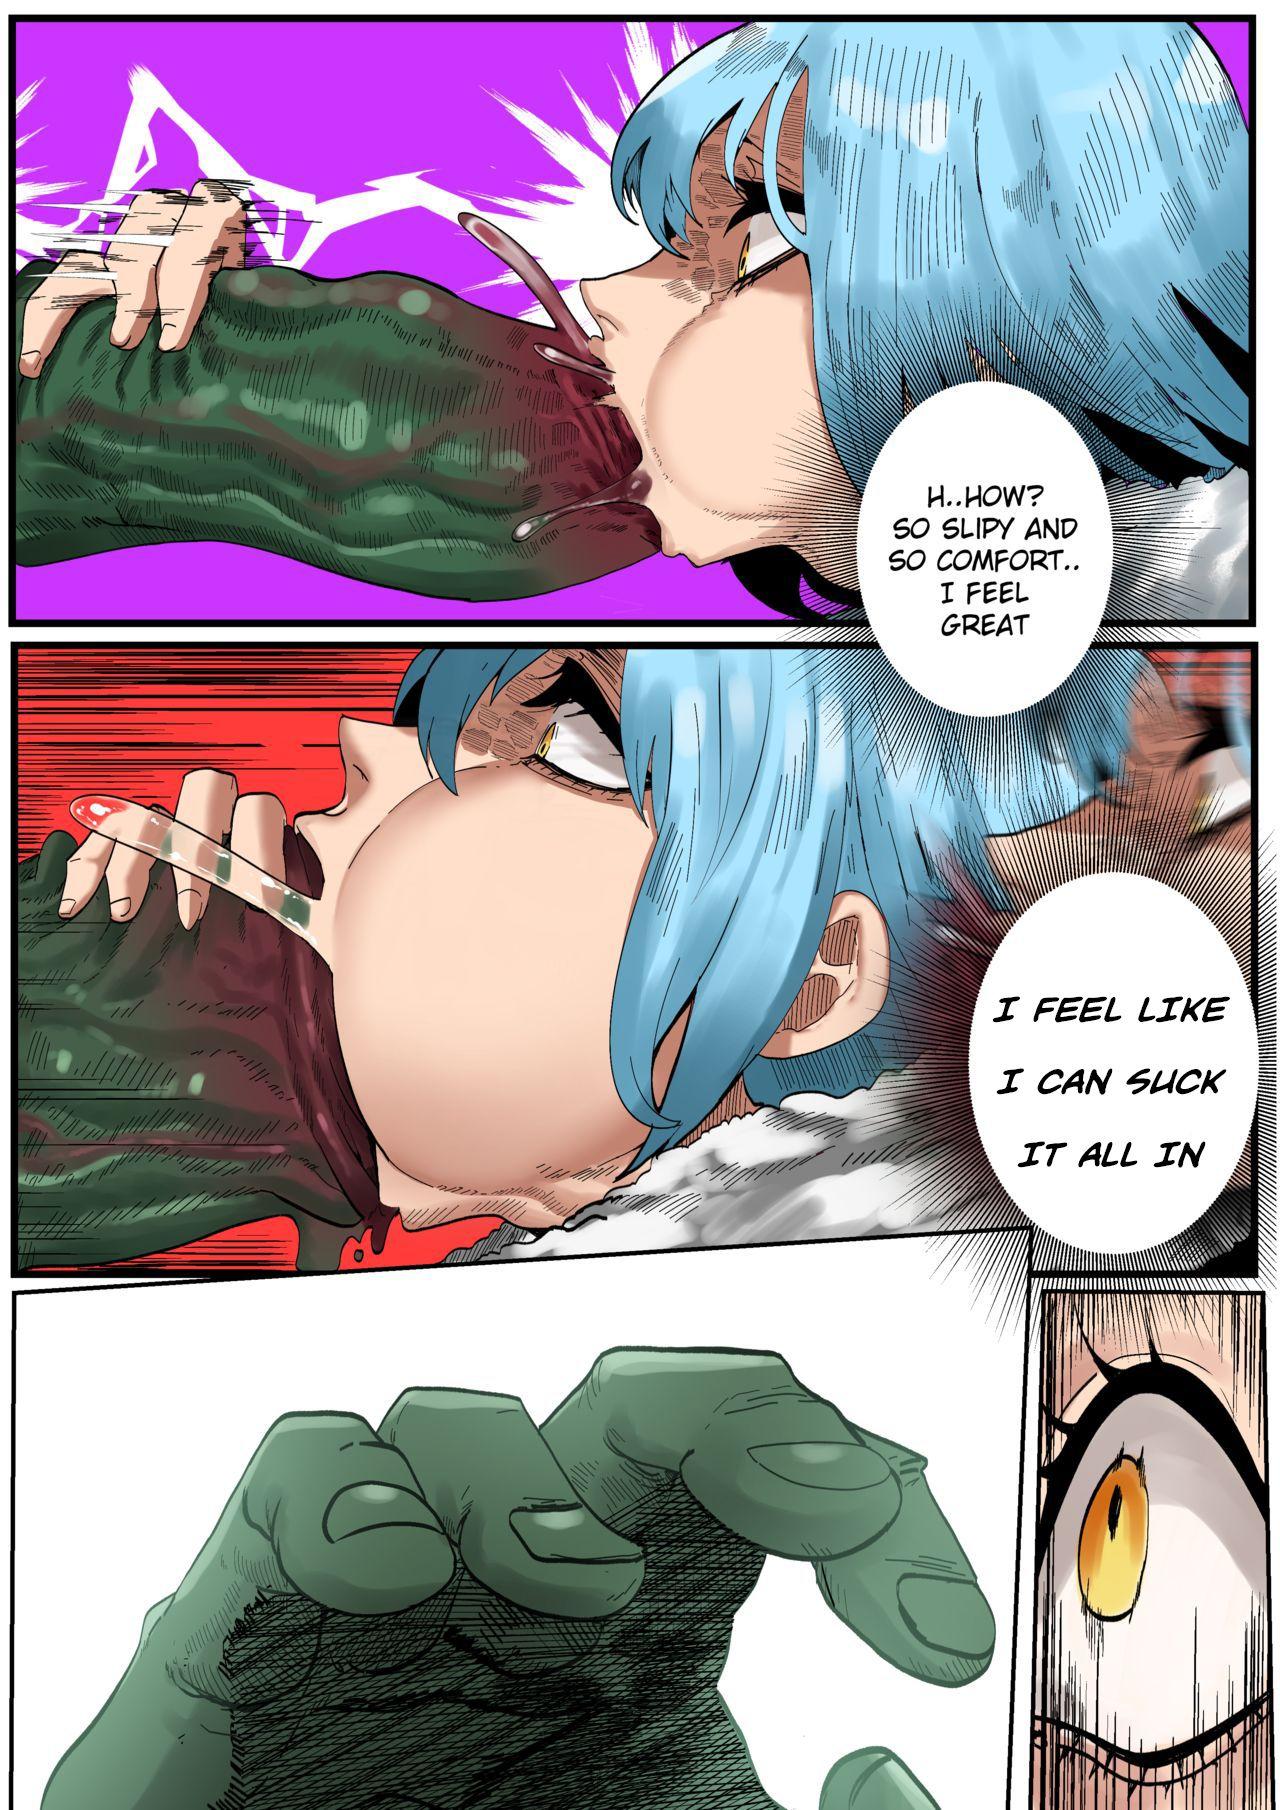 Submissive That Time I Got Reincarnated as a Bitchy Slime - Tensei shitara slime datta ken Gay Hardcore - Page 11